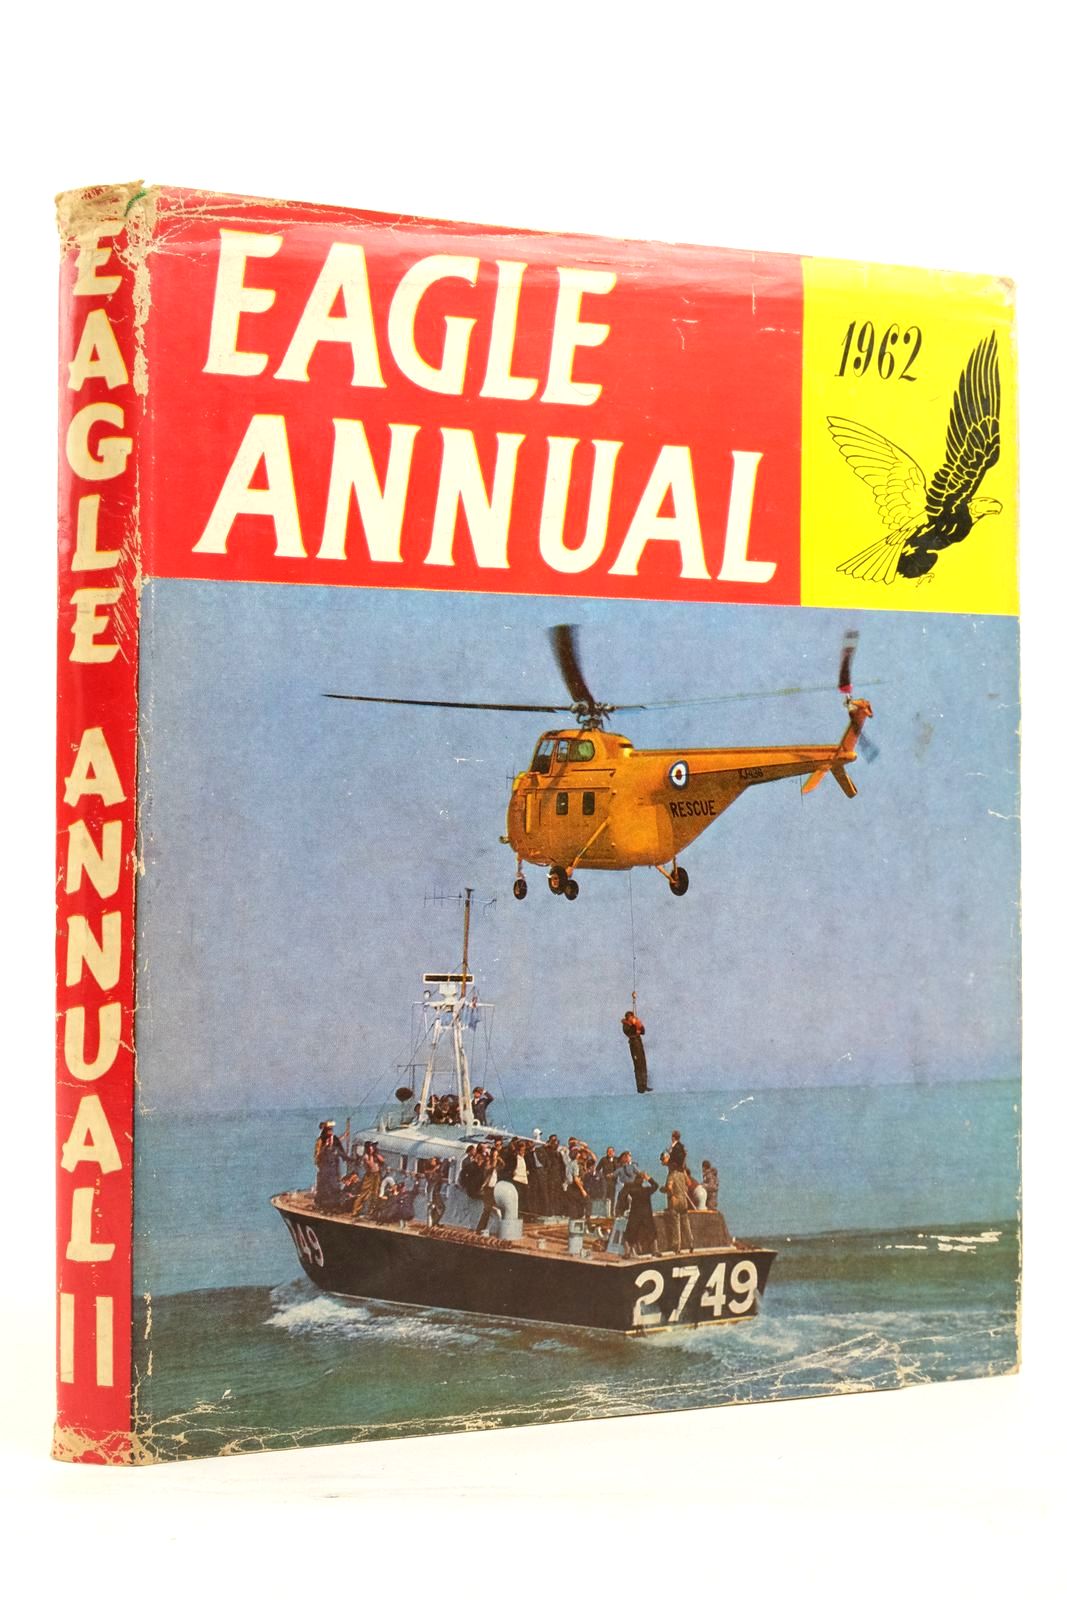 Photo of EAGLE ANNUAL No. 11 (1962) written by Makins, Clifford published by Longacre Press (STOCK CODE: 2137956)  for sale by Stella & Rose's Books